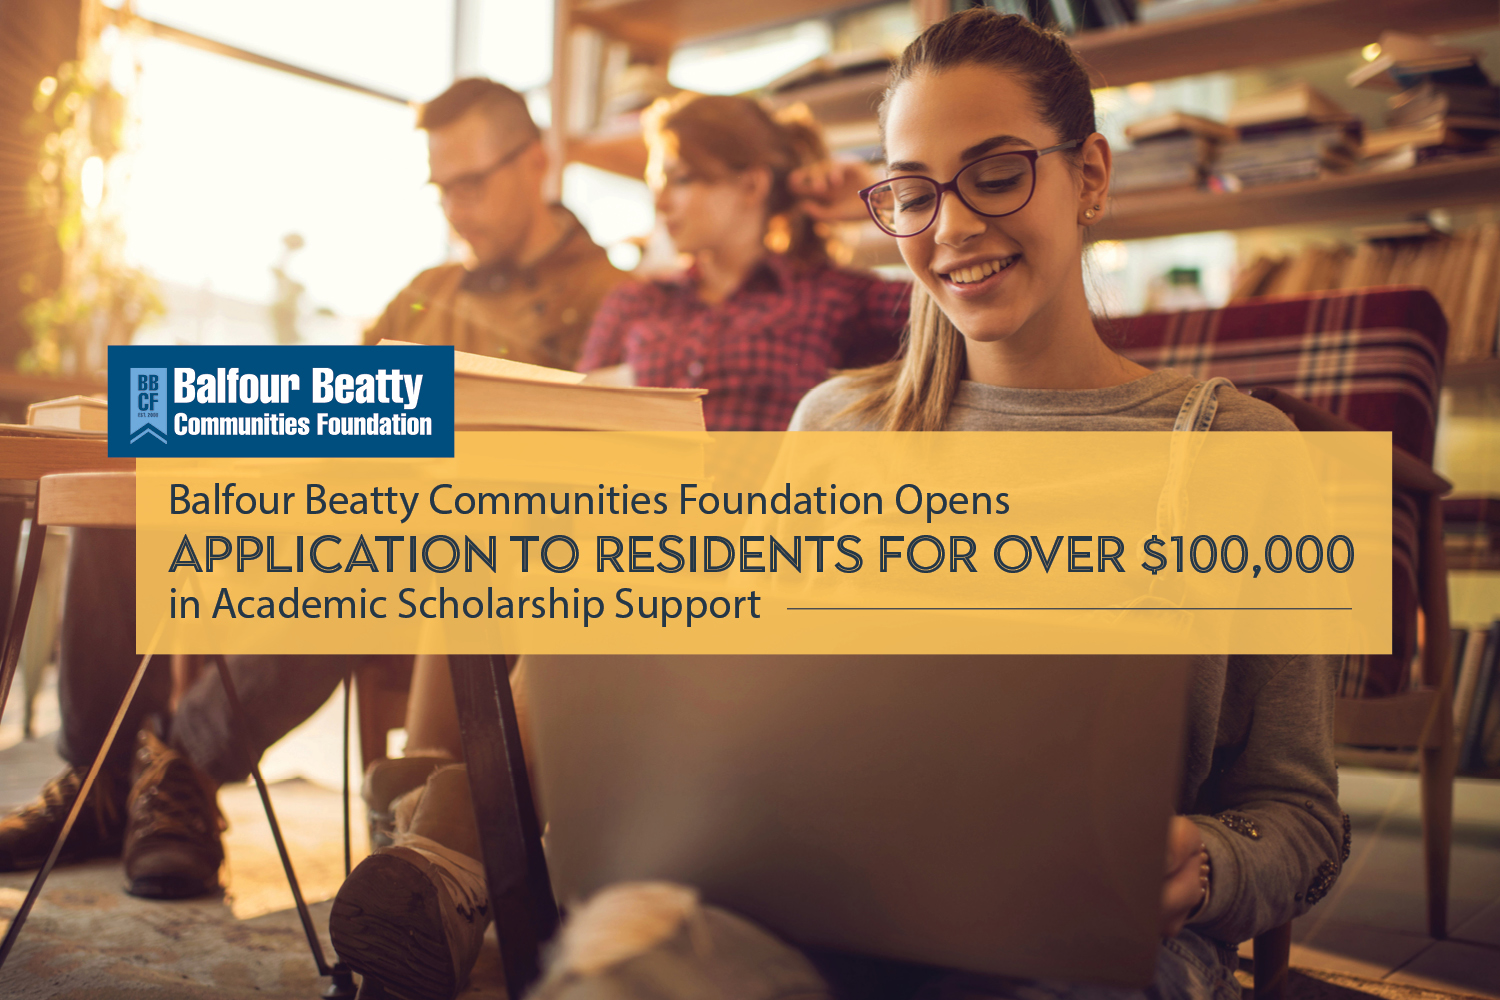 Balfour Beatty Communities Foundation Opens Application to Residents for over $100,000 in Academic Scholarship Support